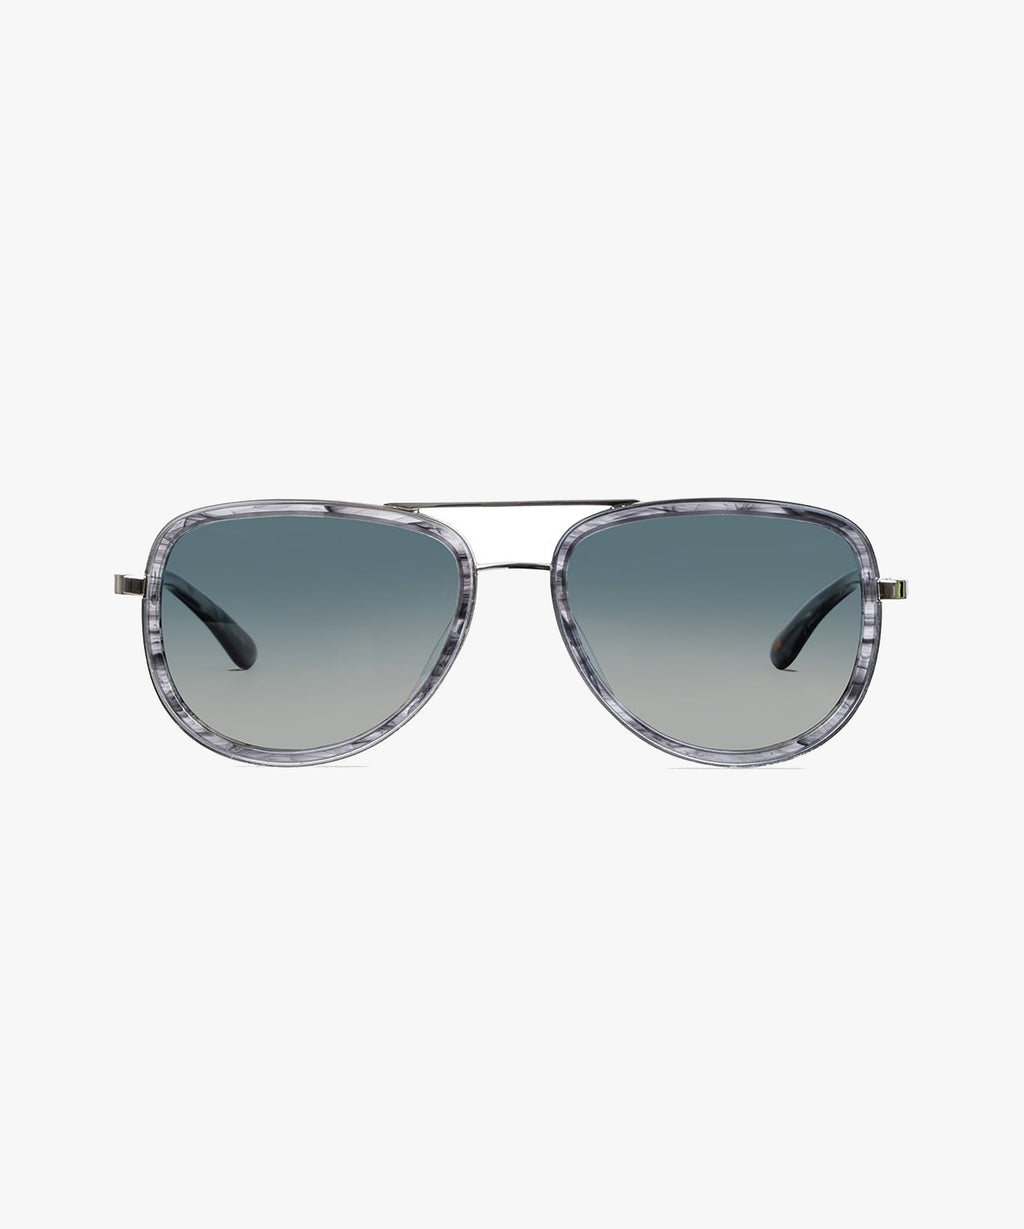 This Season's Go-To Sunglasses From Christopher Cloos